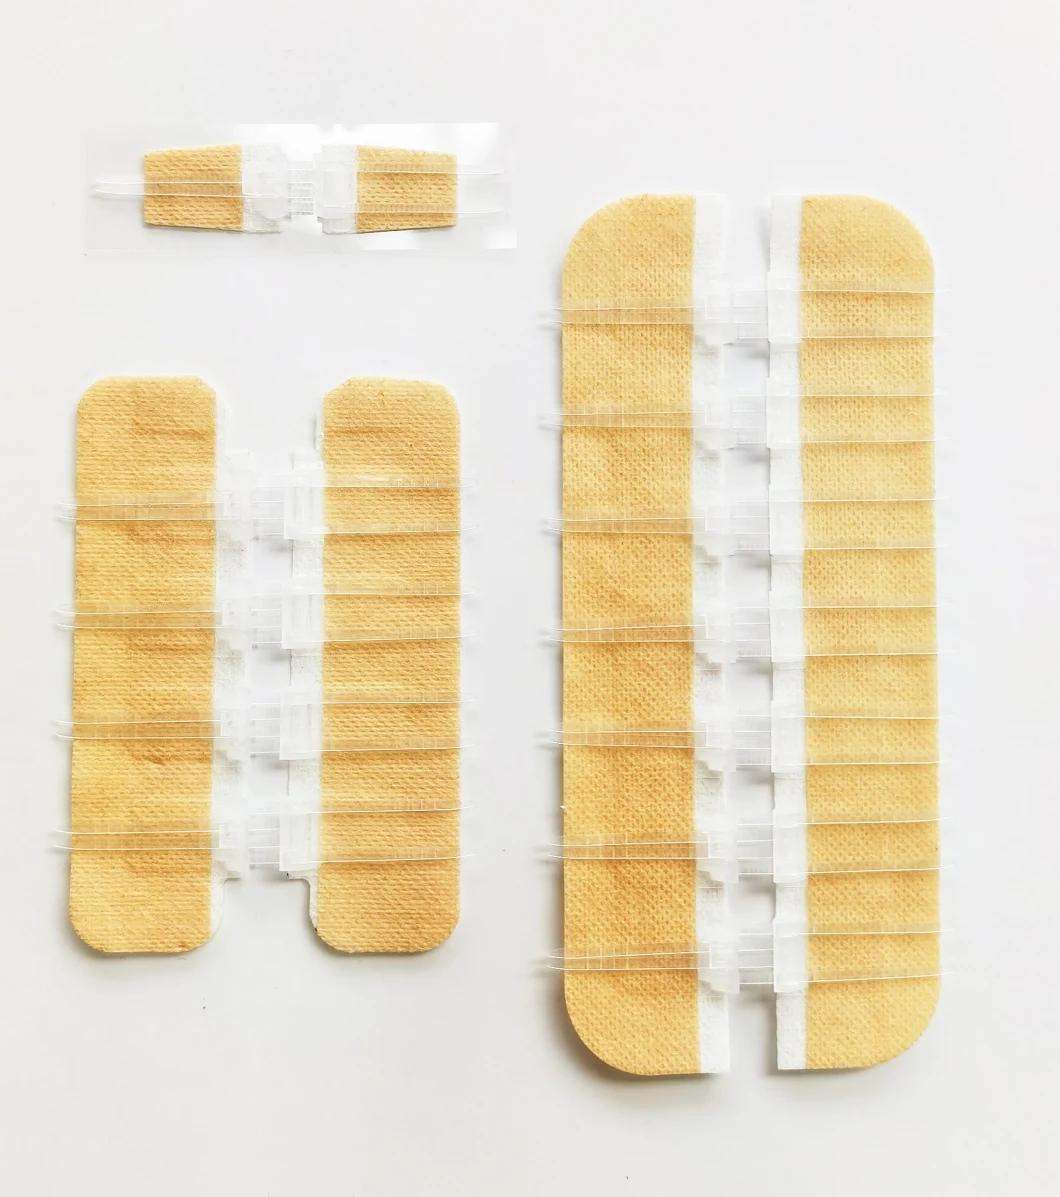 Surgical Wound Closure Plaster, Adhesive Wound Closure Device